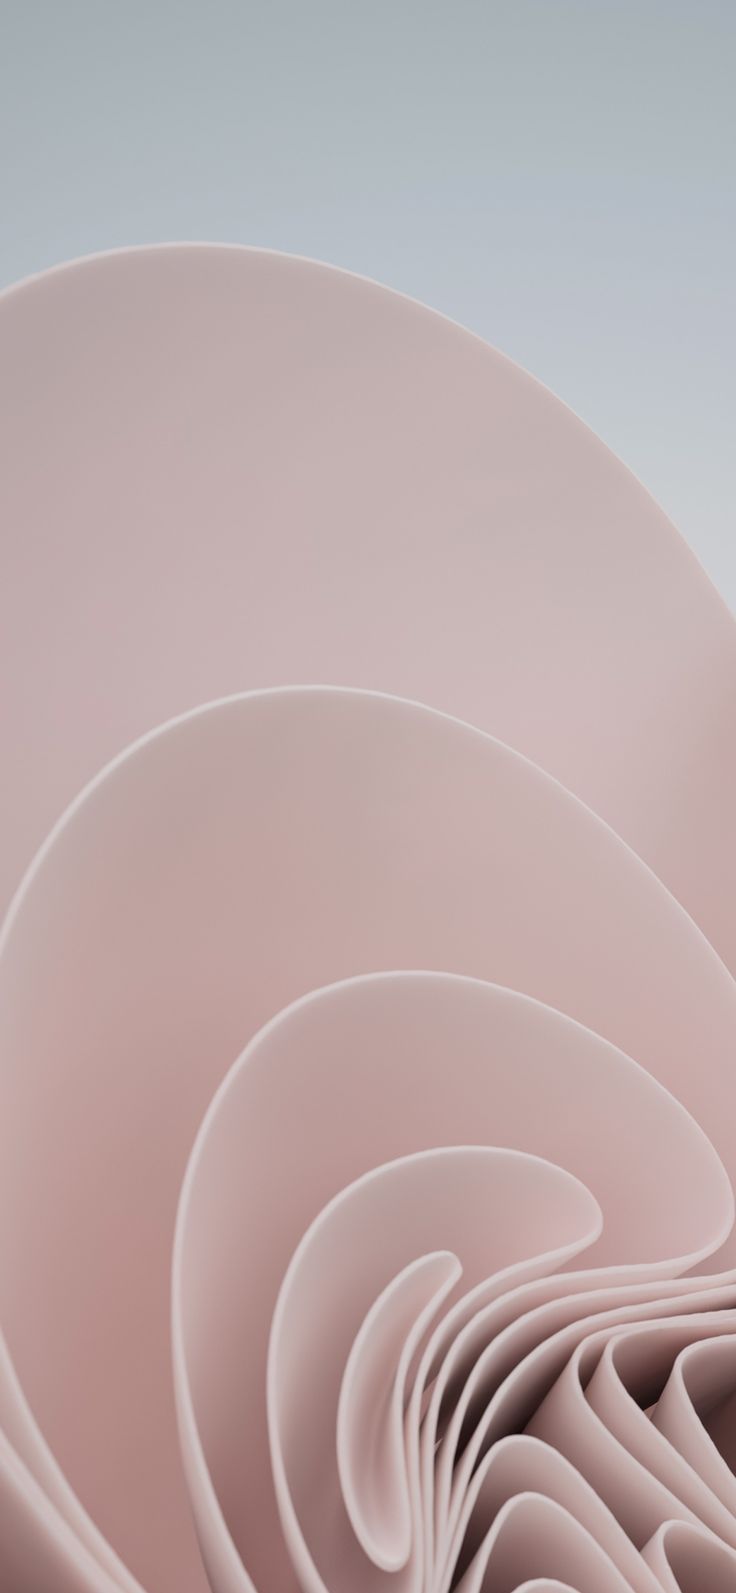 A close up of a pink sculpture with many curves - Windows 11